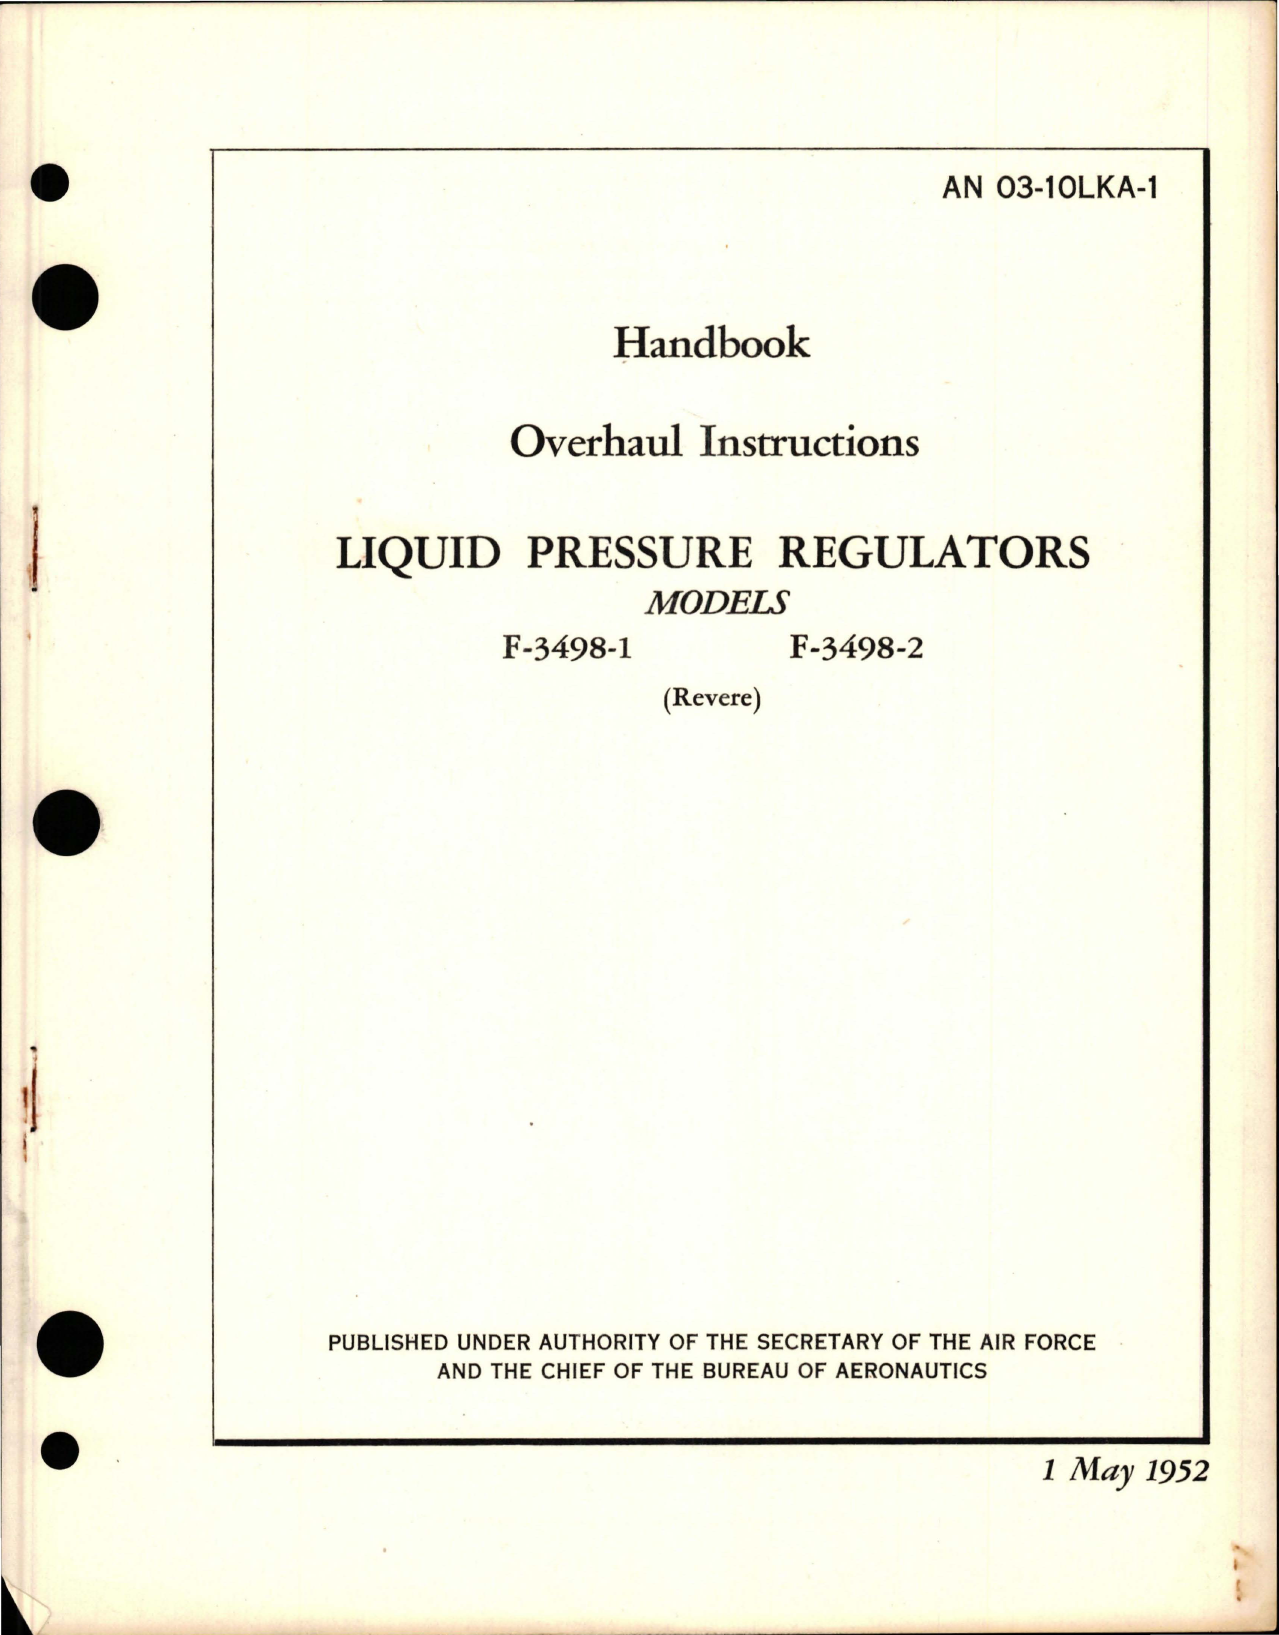 Sample page 1 from AirCorps Library document: Overhaul Instructions for Liquid Pressure Regulators - Models F-3498-1 and F-3498-2